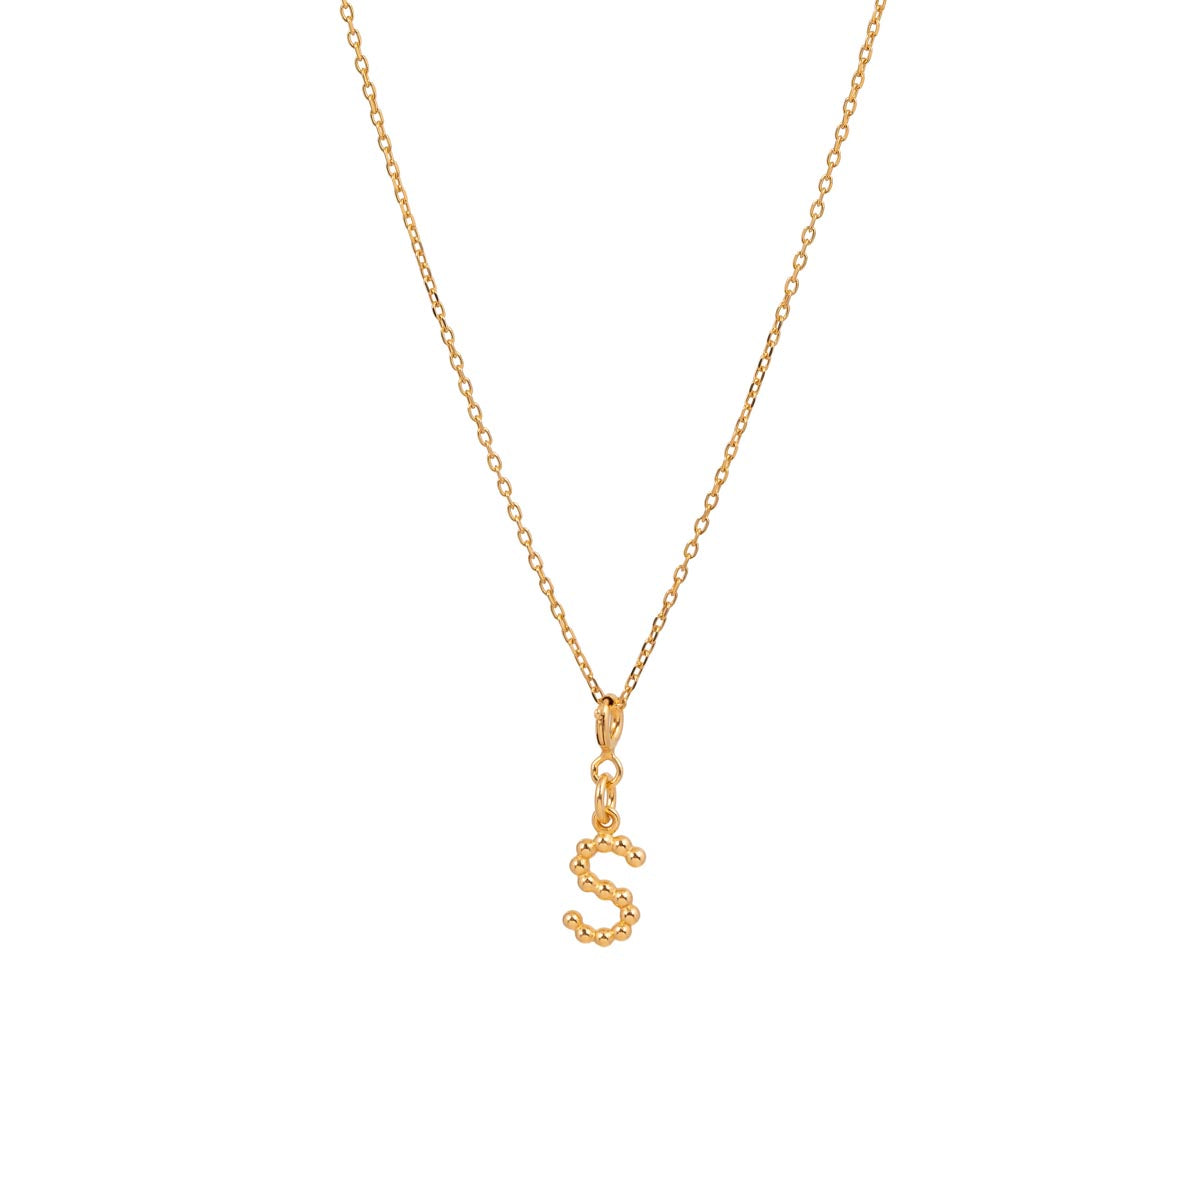 Yllätys Monogram Necklace S, gold-plated silver